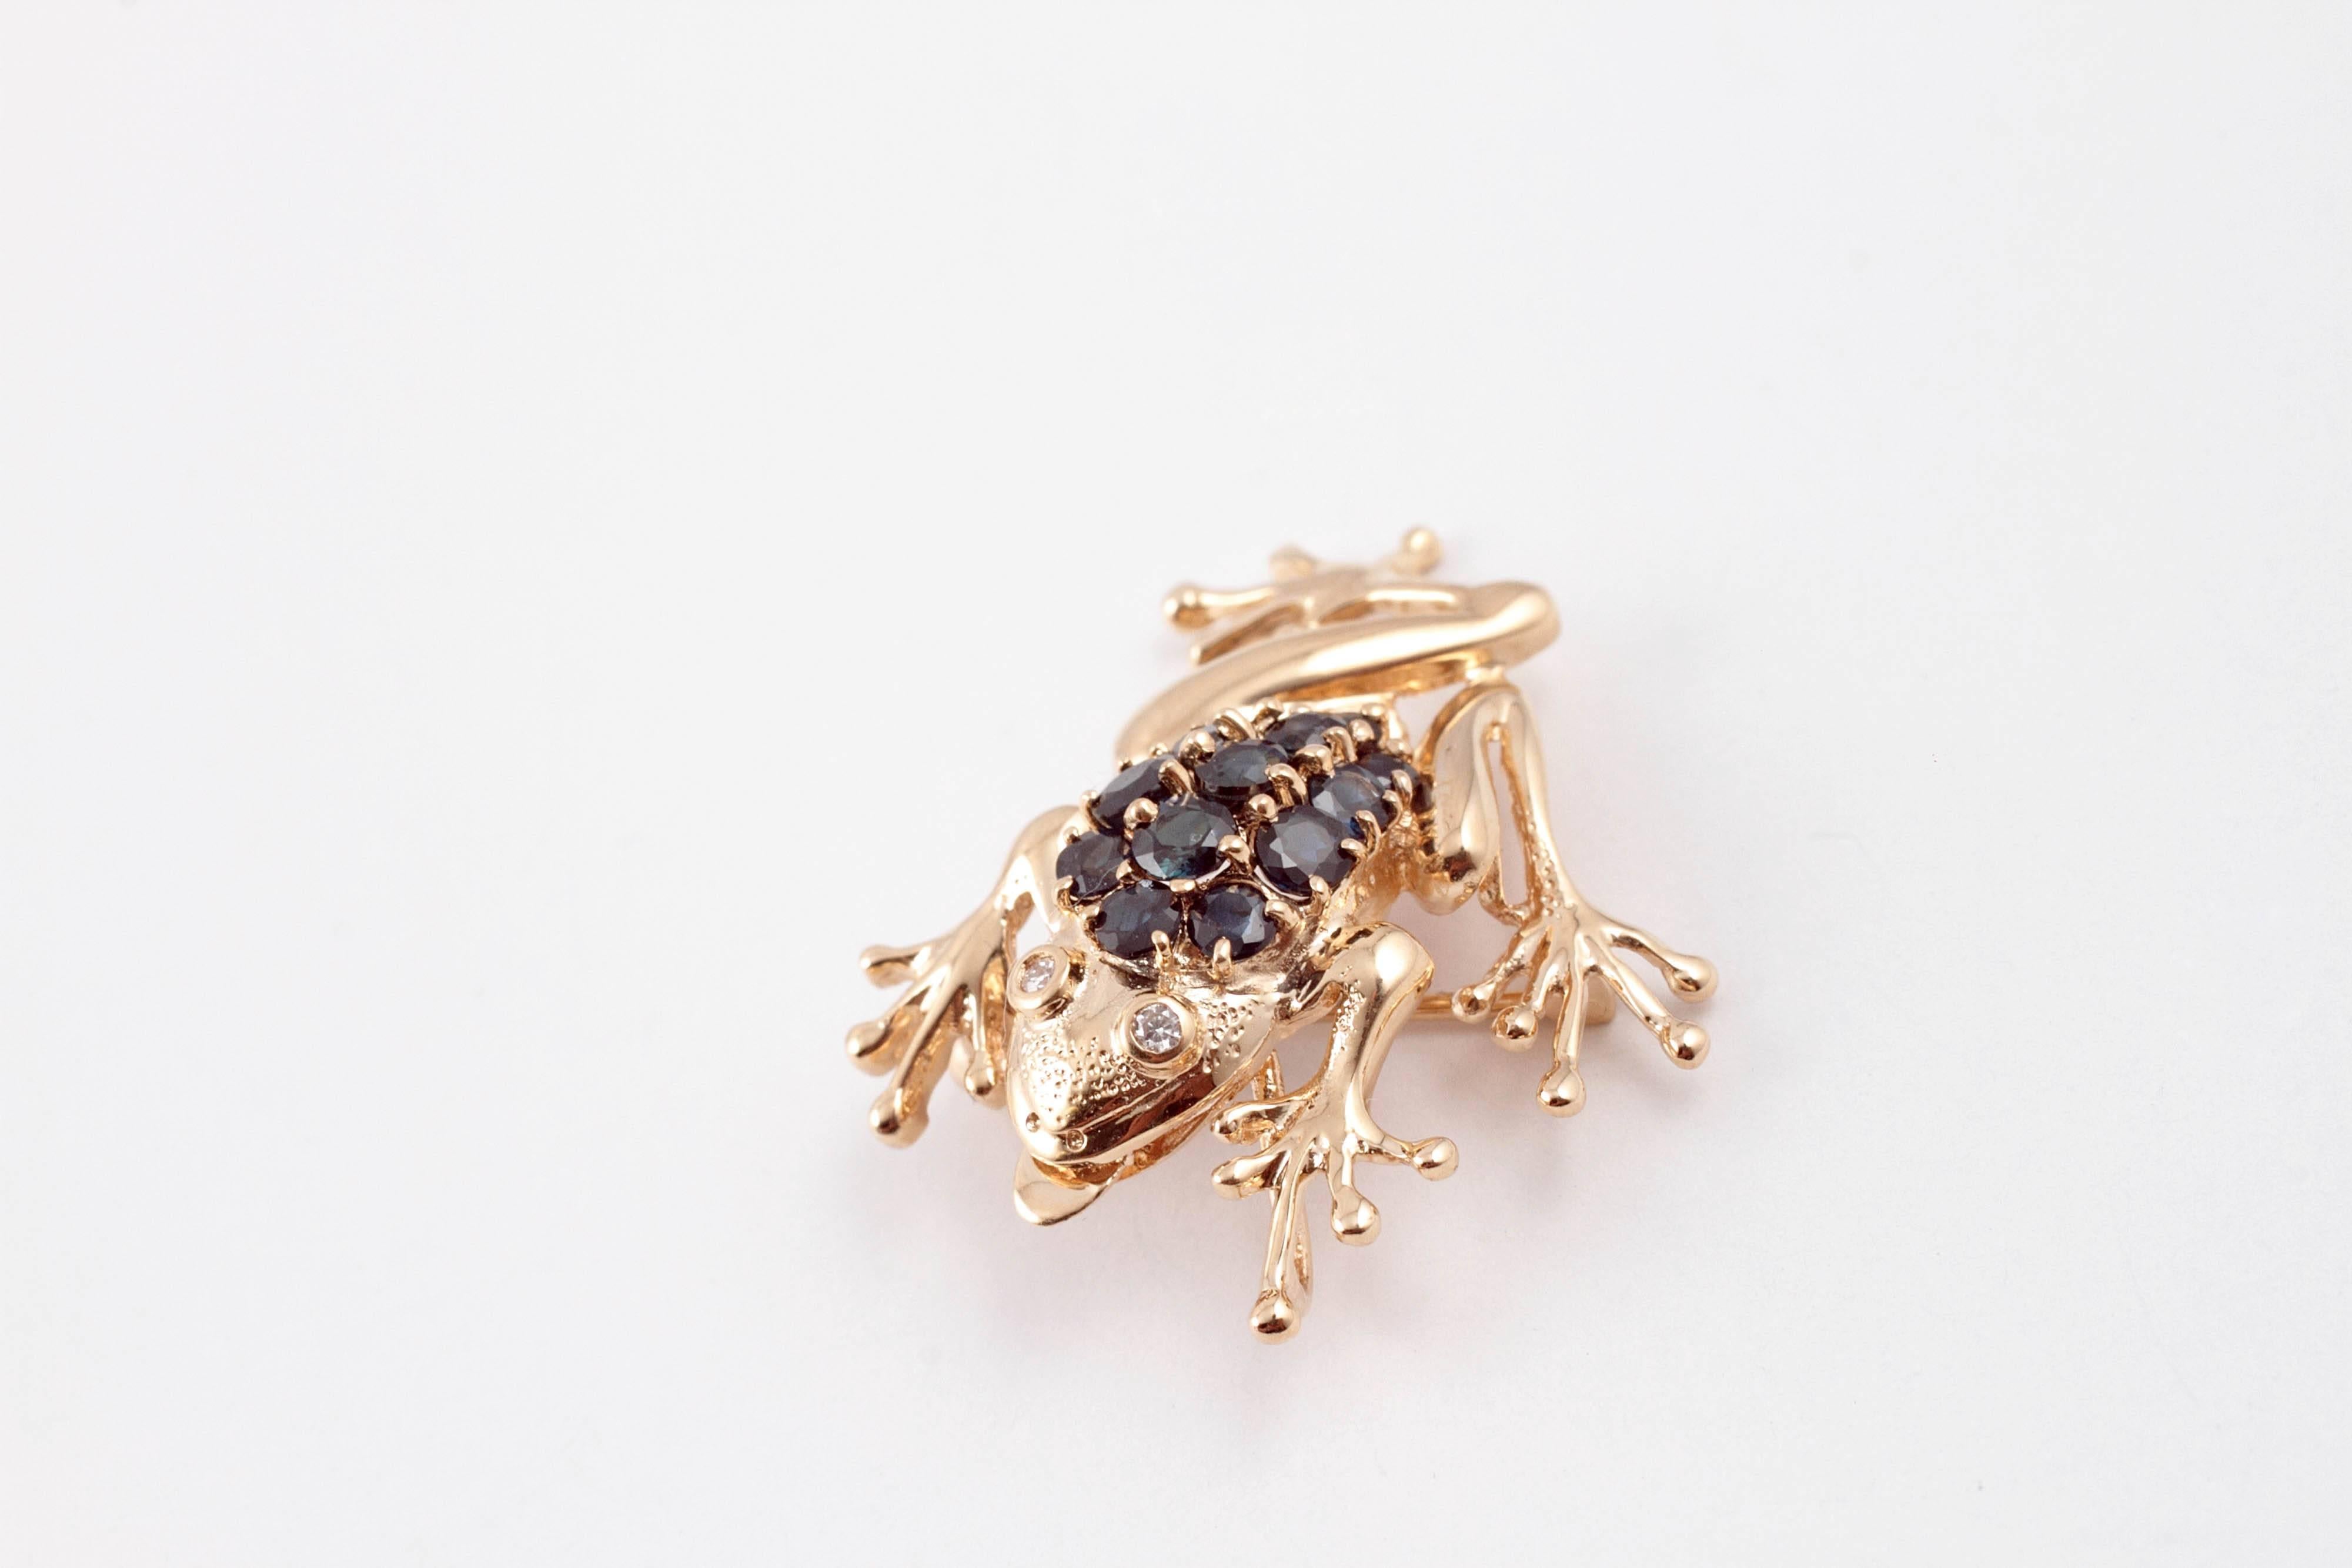 For the lover of froggies!  In 14 karat yellow gold with round blue sapphires. 1 1/2 inches in length.